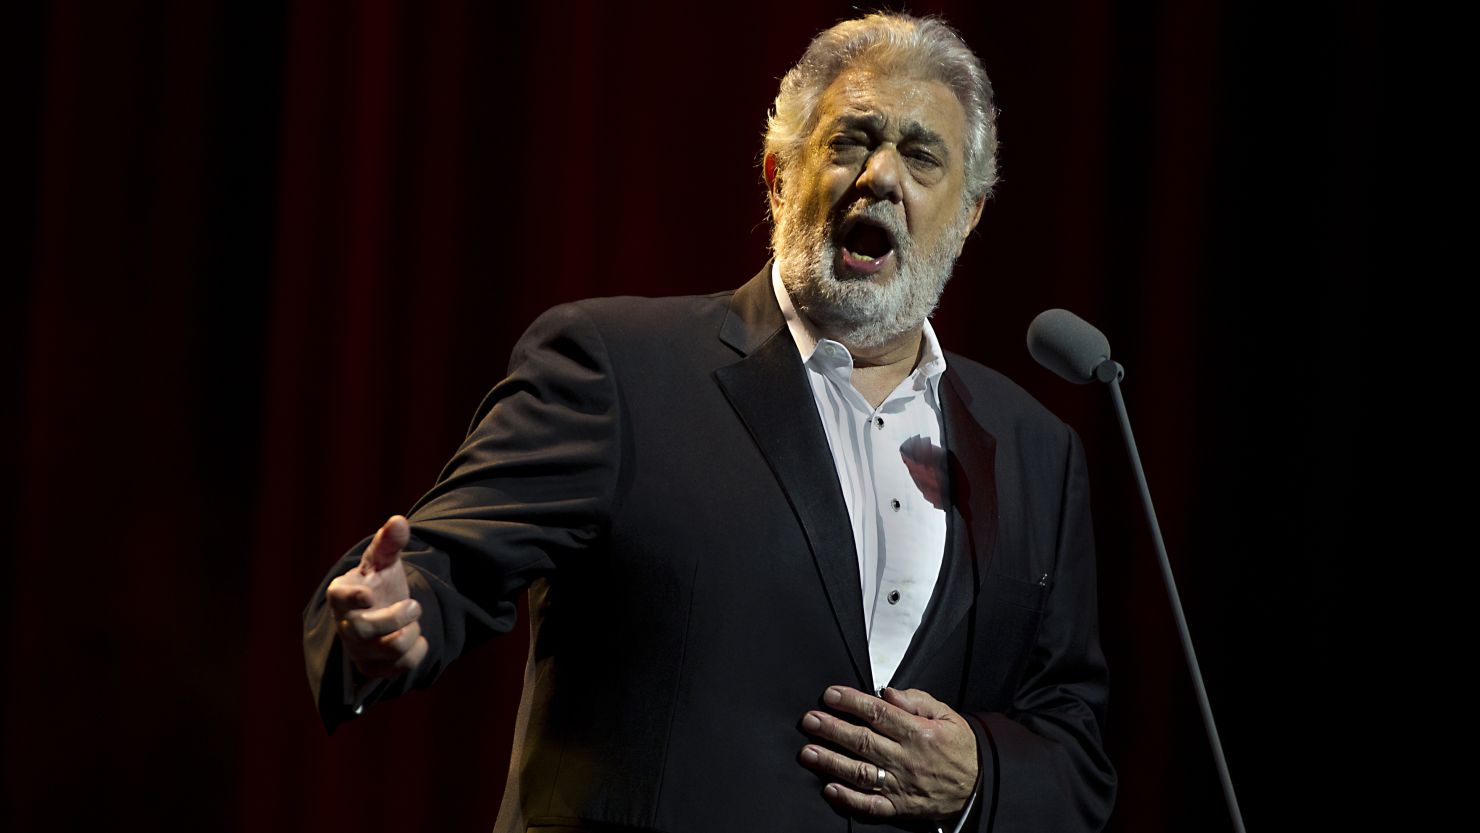 Spanish tenor Placido Domingo, seen here in a concert in June, is hospitalized for a blood clot in his lung.